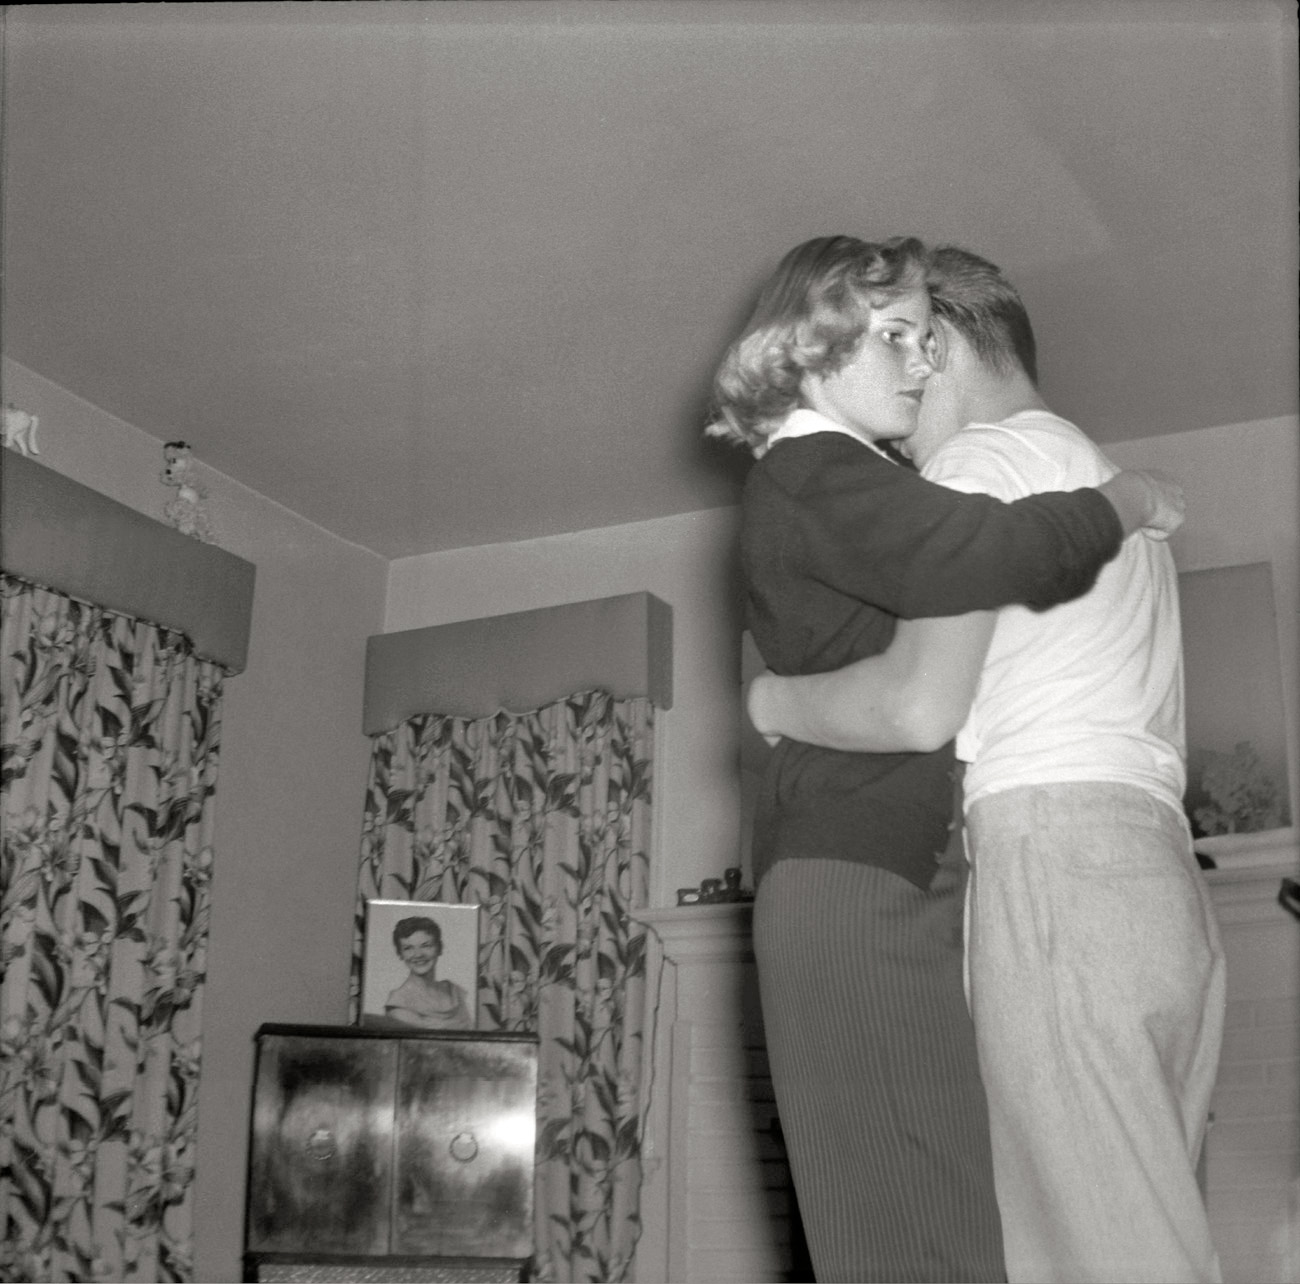 At the same party, the dancers from this photo continue their fun. Scanned from a Kodak safety negative. View full size.